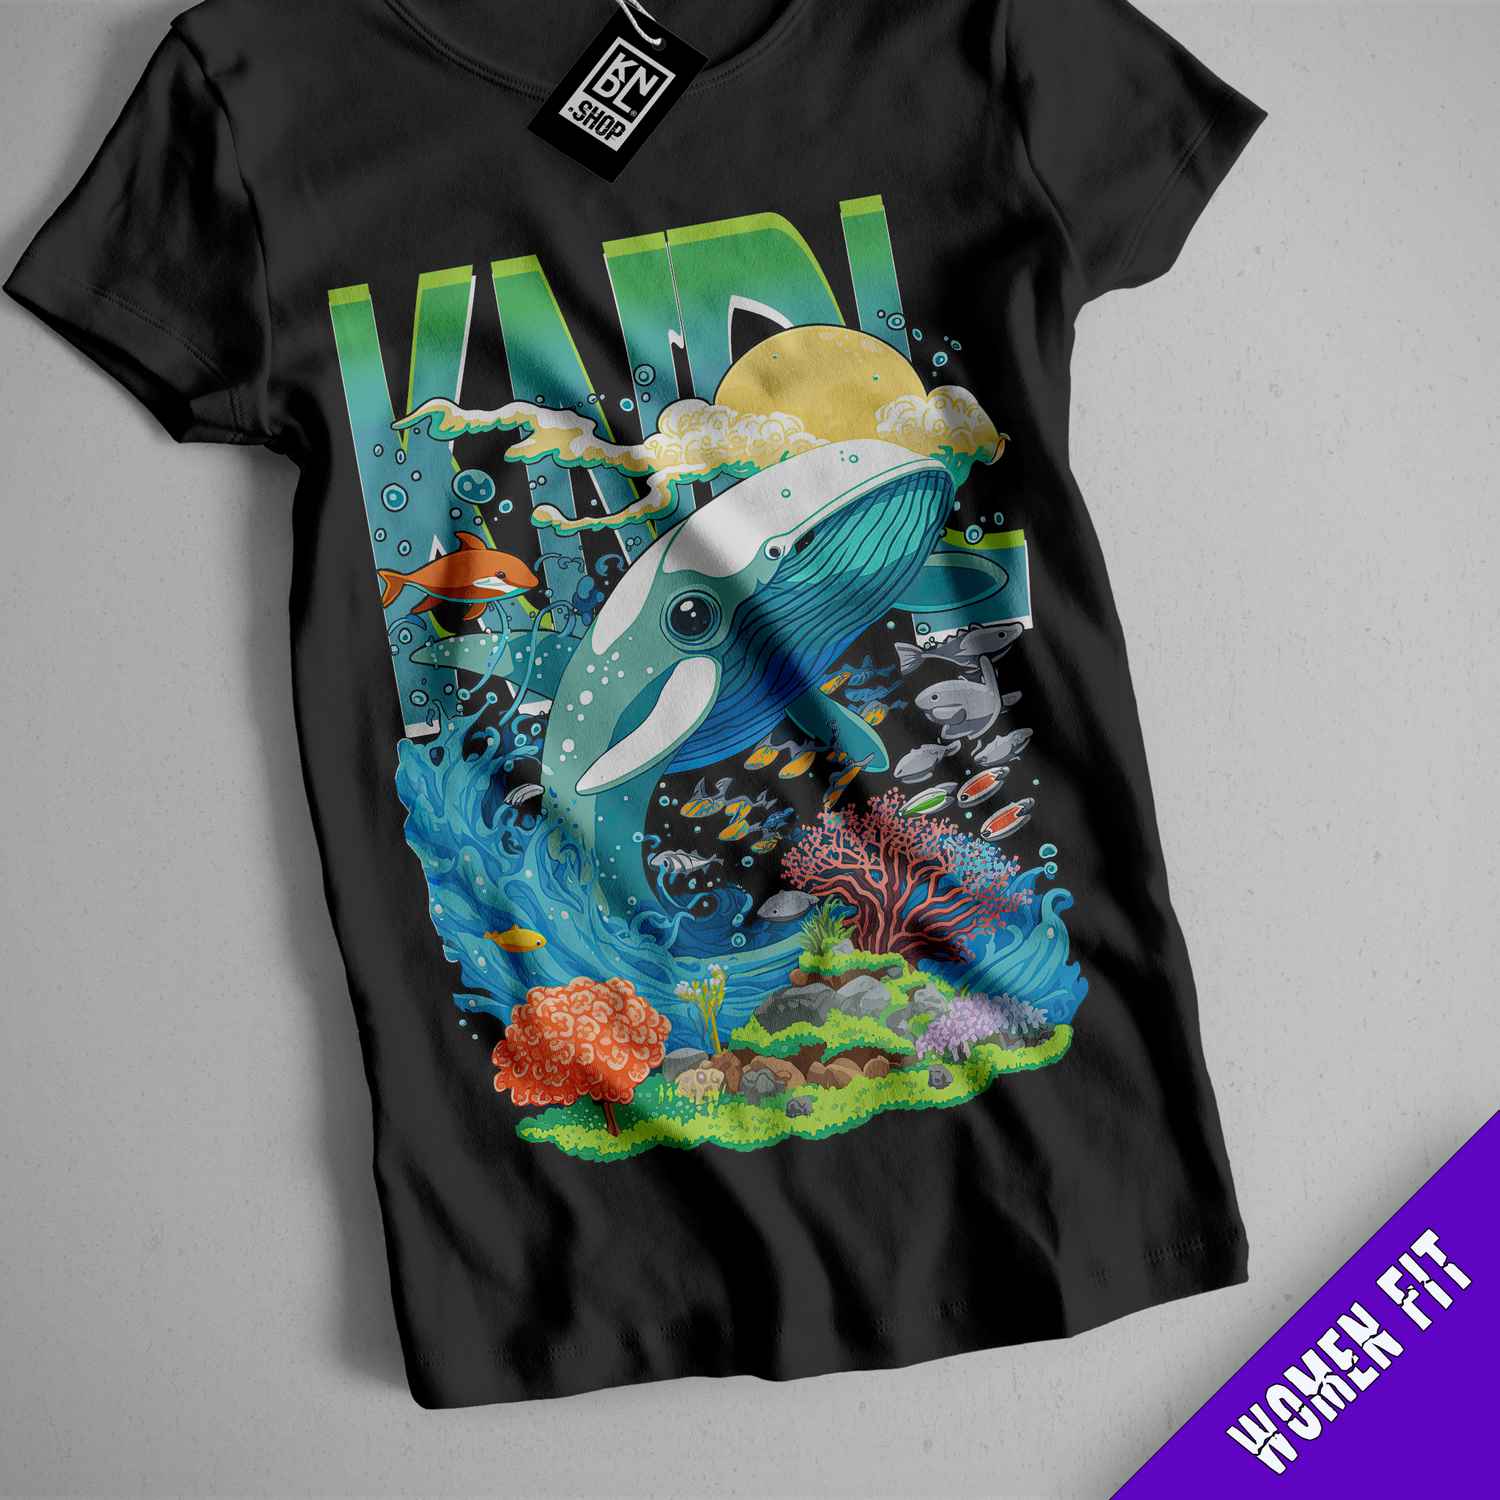 a t - shirt with a picture of a whale and fish